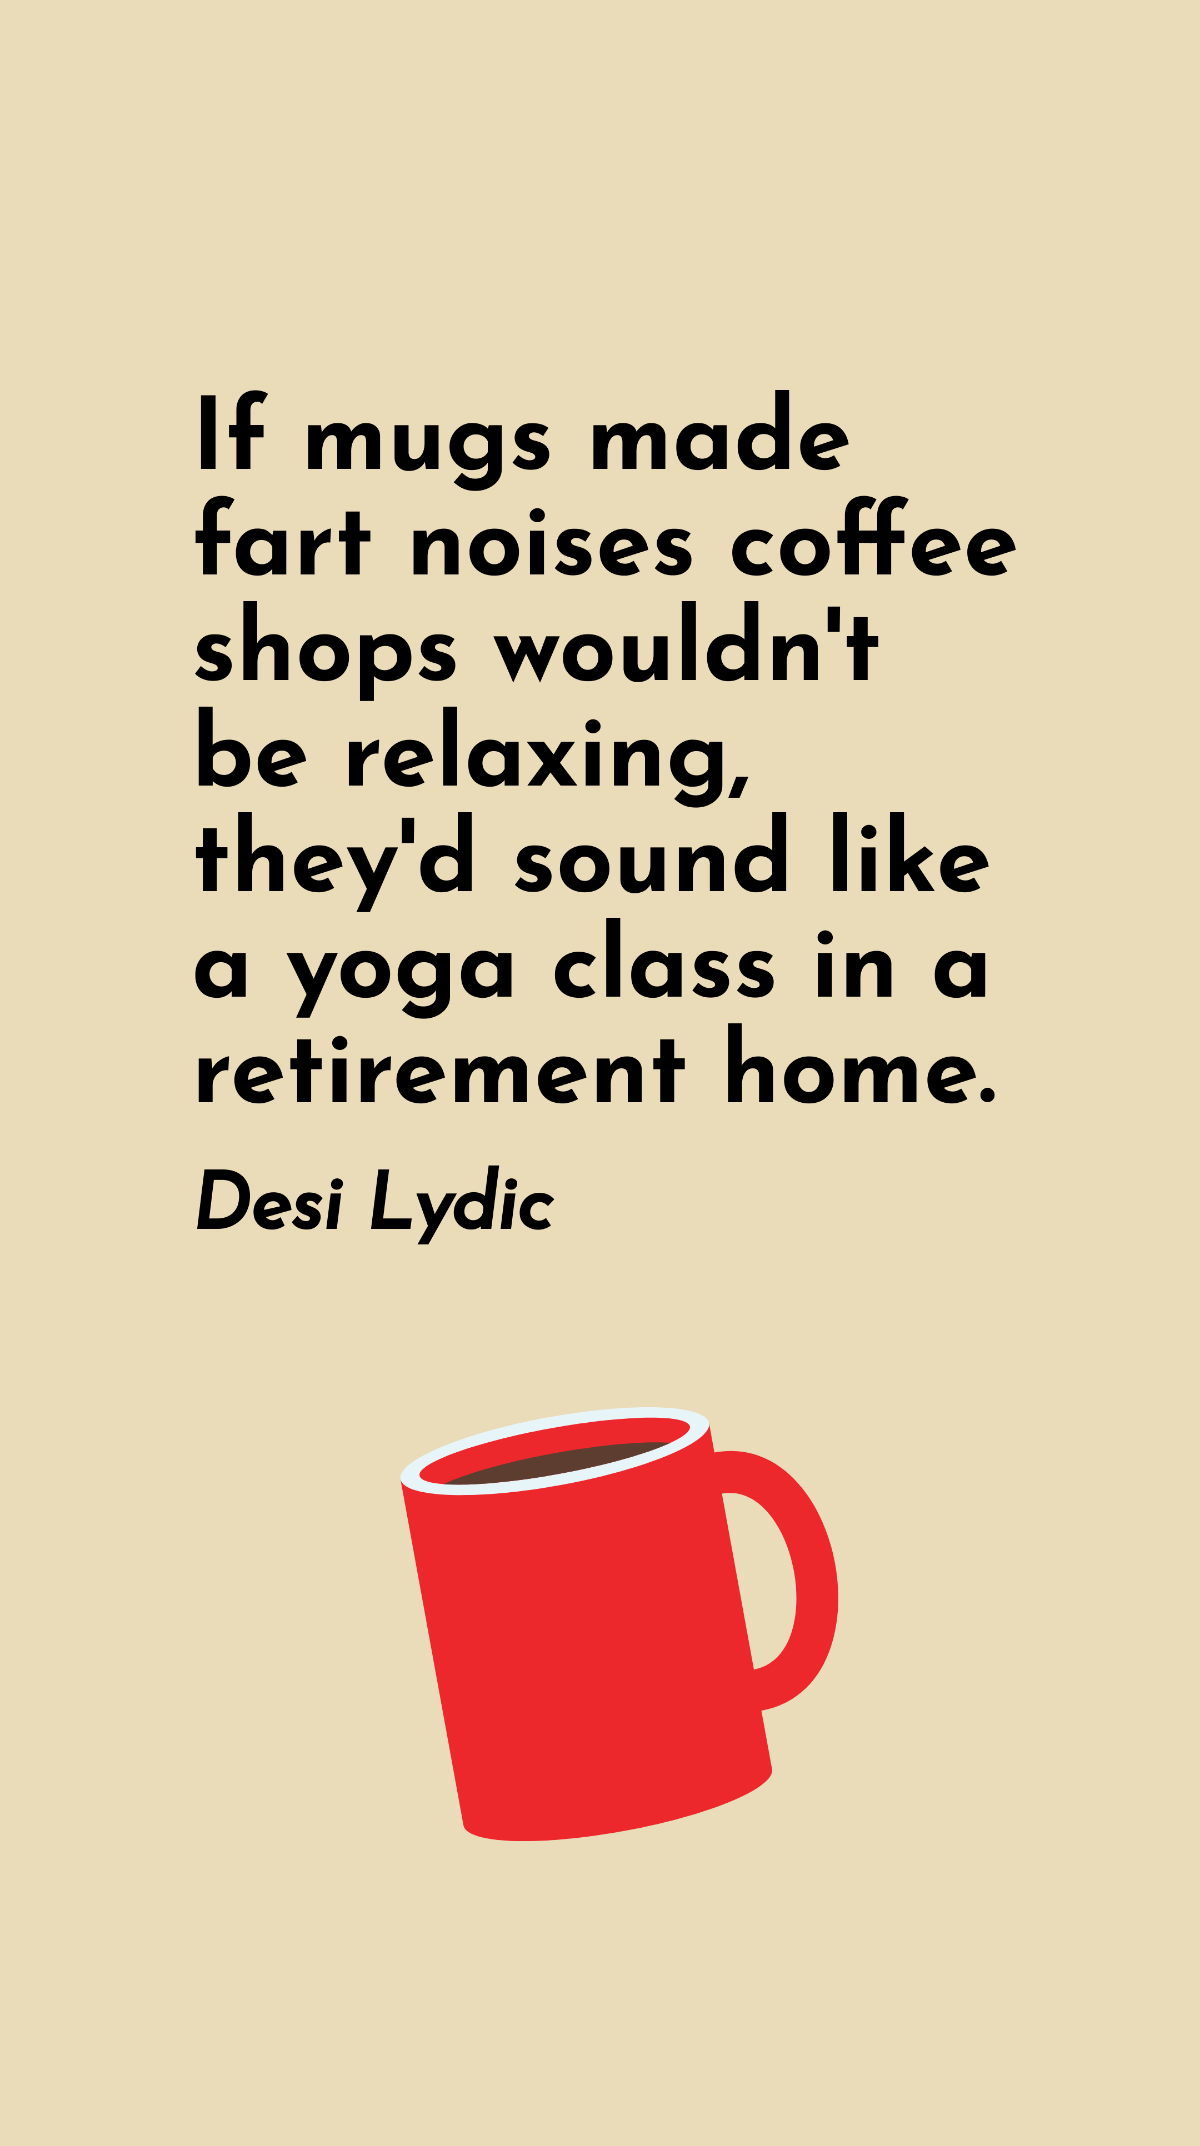 Desi Lydic - If mugs made fart noises coffee shops wouldn't be relaxing, they'd sound like a yoga class in a retirement home. Template